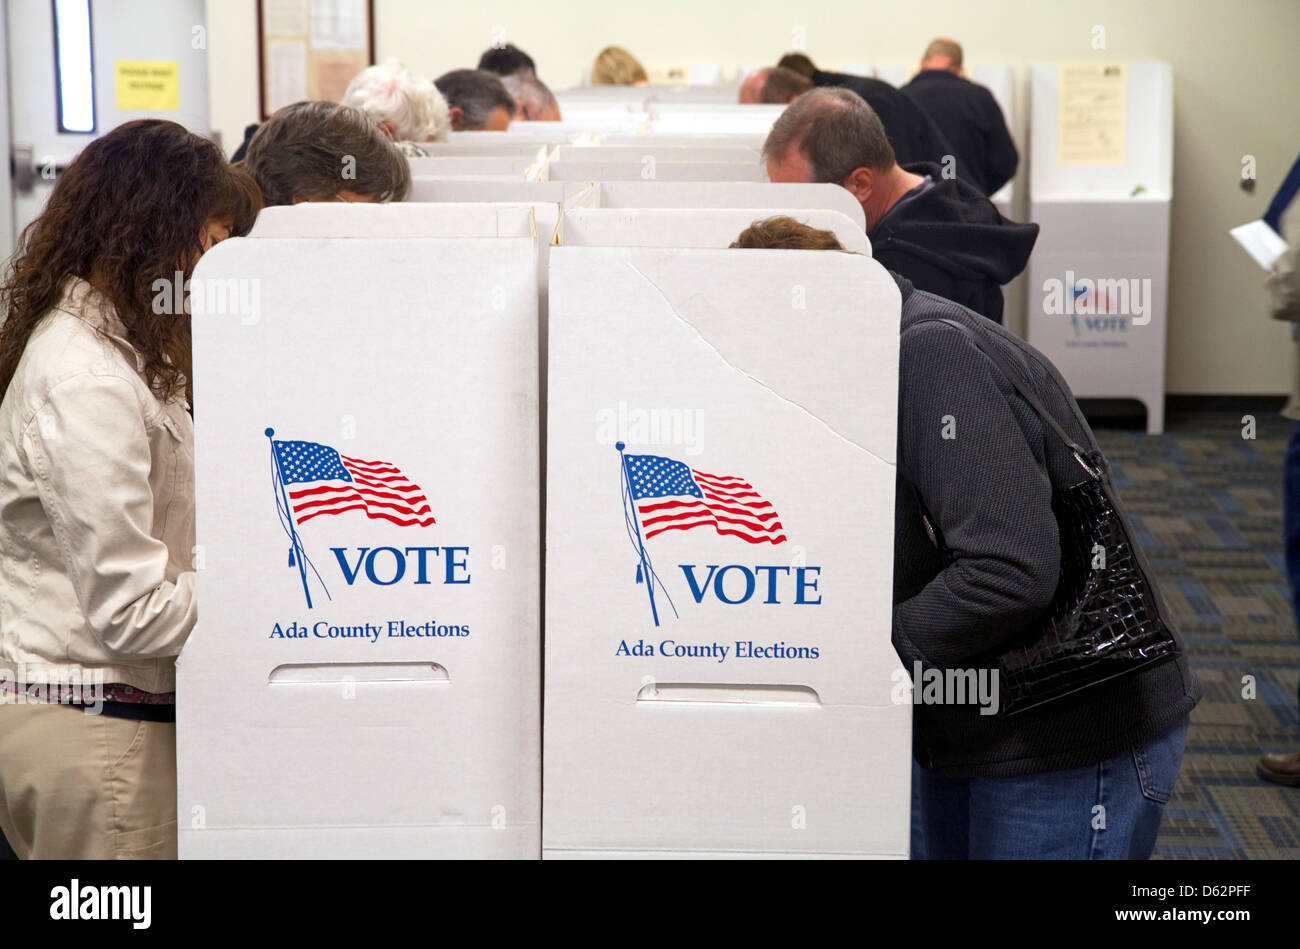 People vote in cardboard voting booths at a polling station in Boise, Idaho, USA. Stock Photo